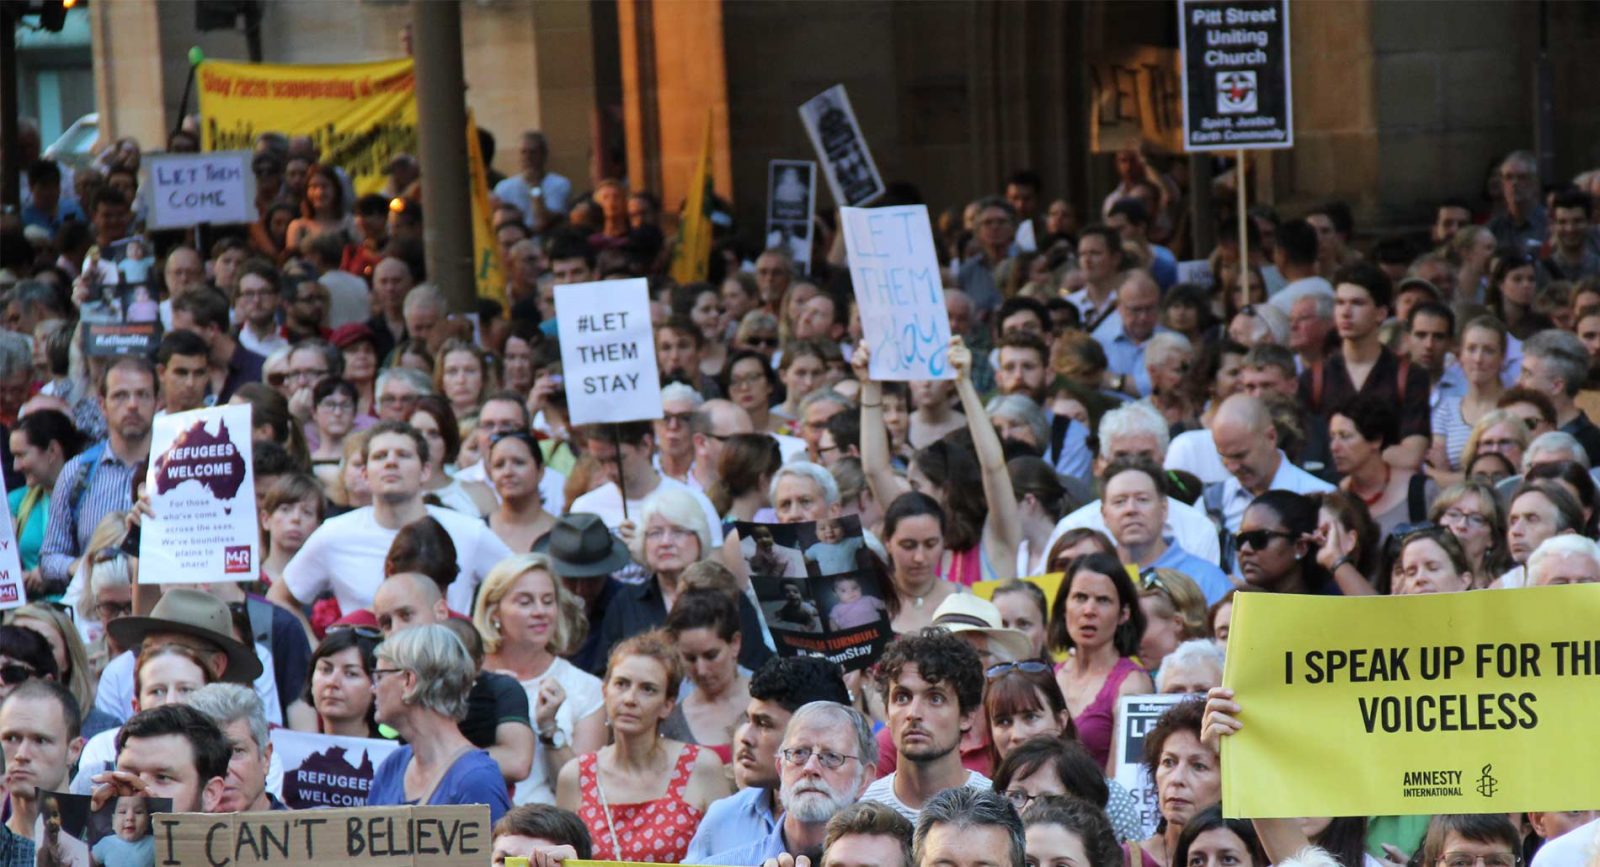 A crowd gathers in Sydney to protest the treatment of refugees and asylum seekers, February 2016.